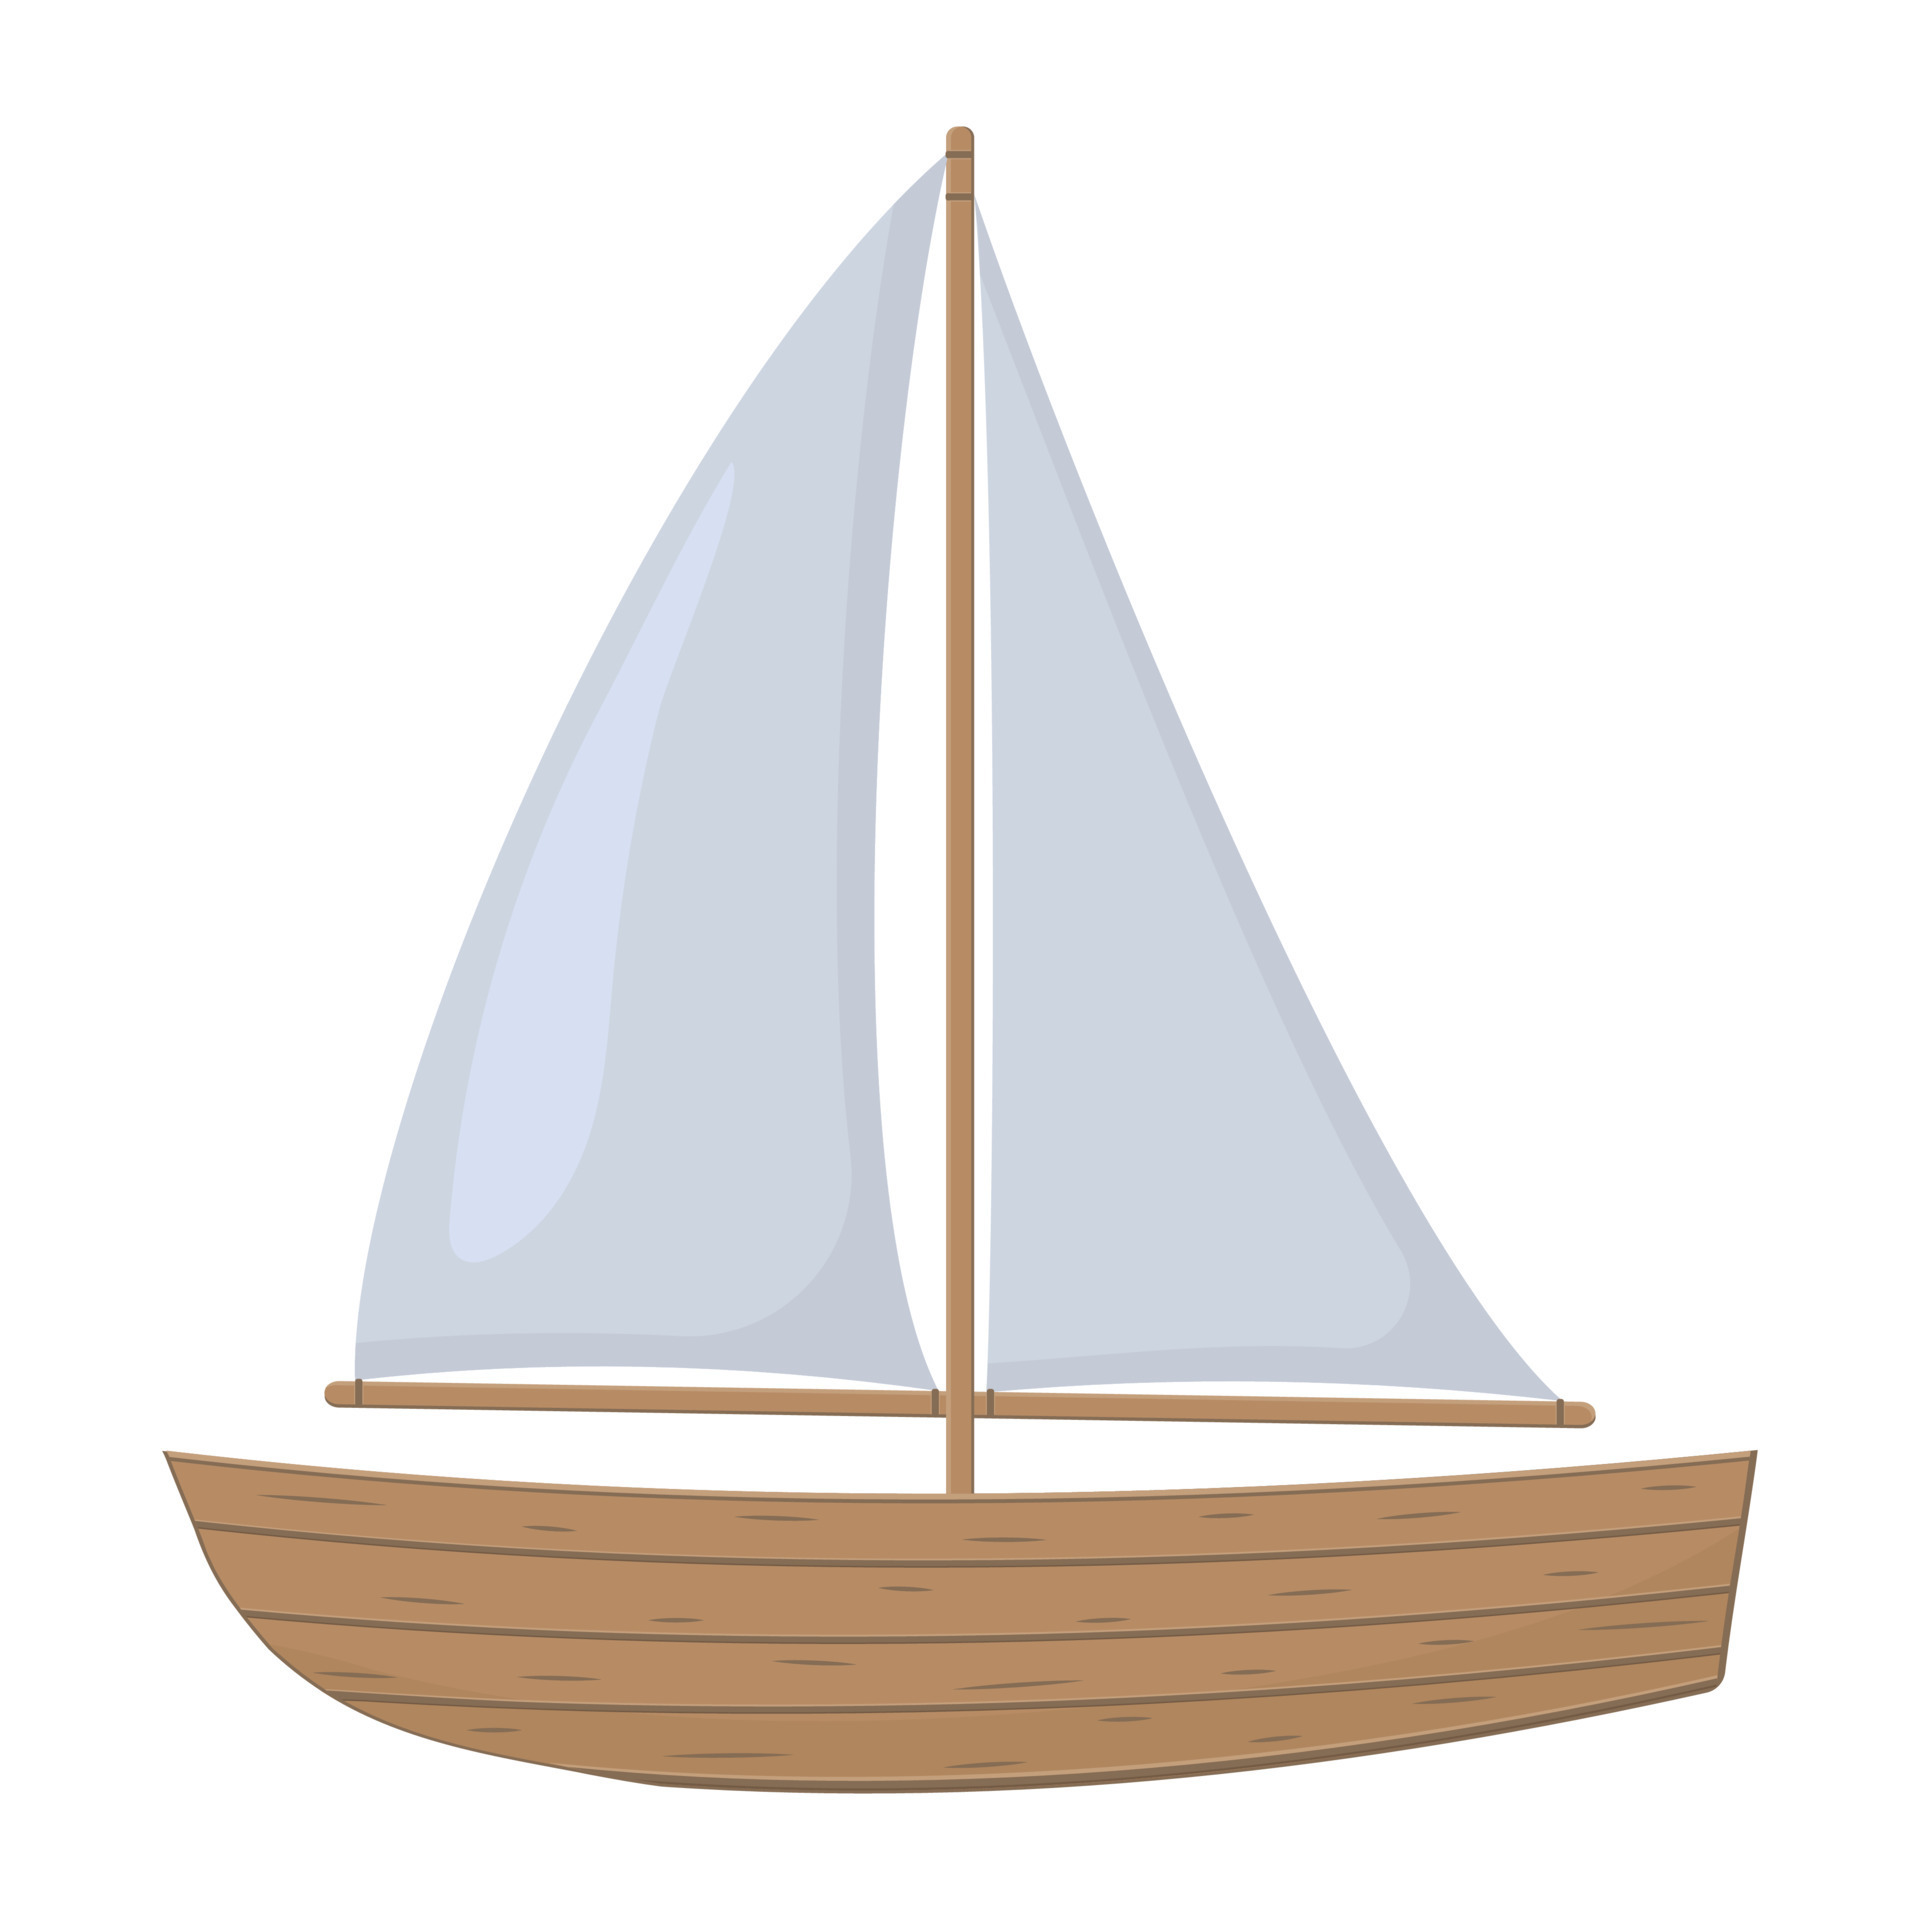 Wooden boat with sail color vector illustration in cartoon style